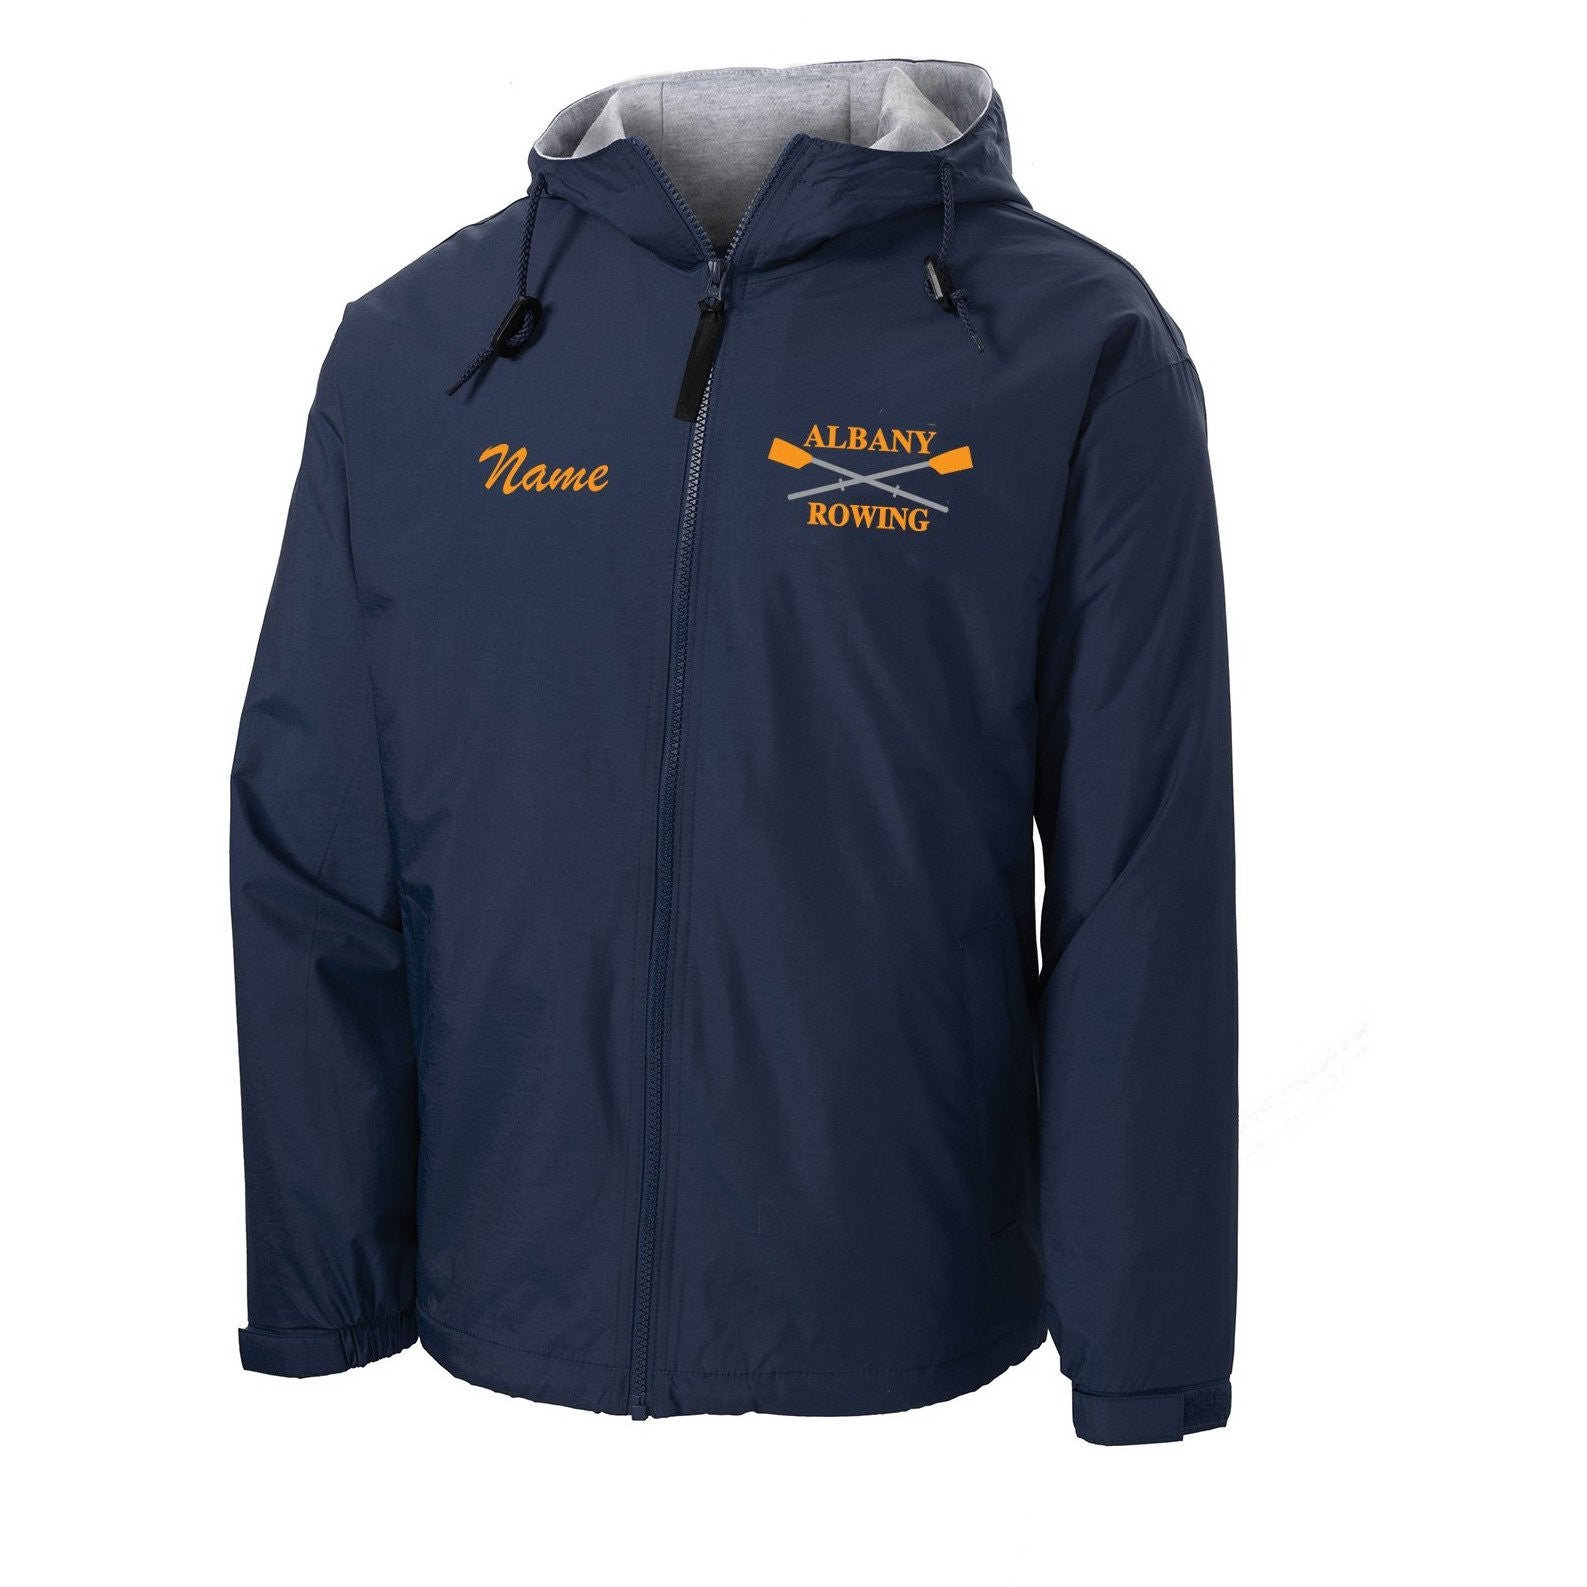 Official Albany Rowing Center Team Spectator Jacket